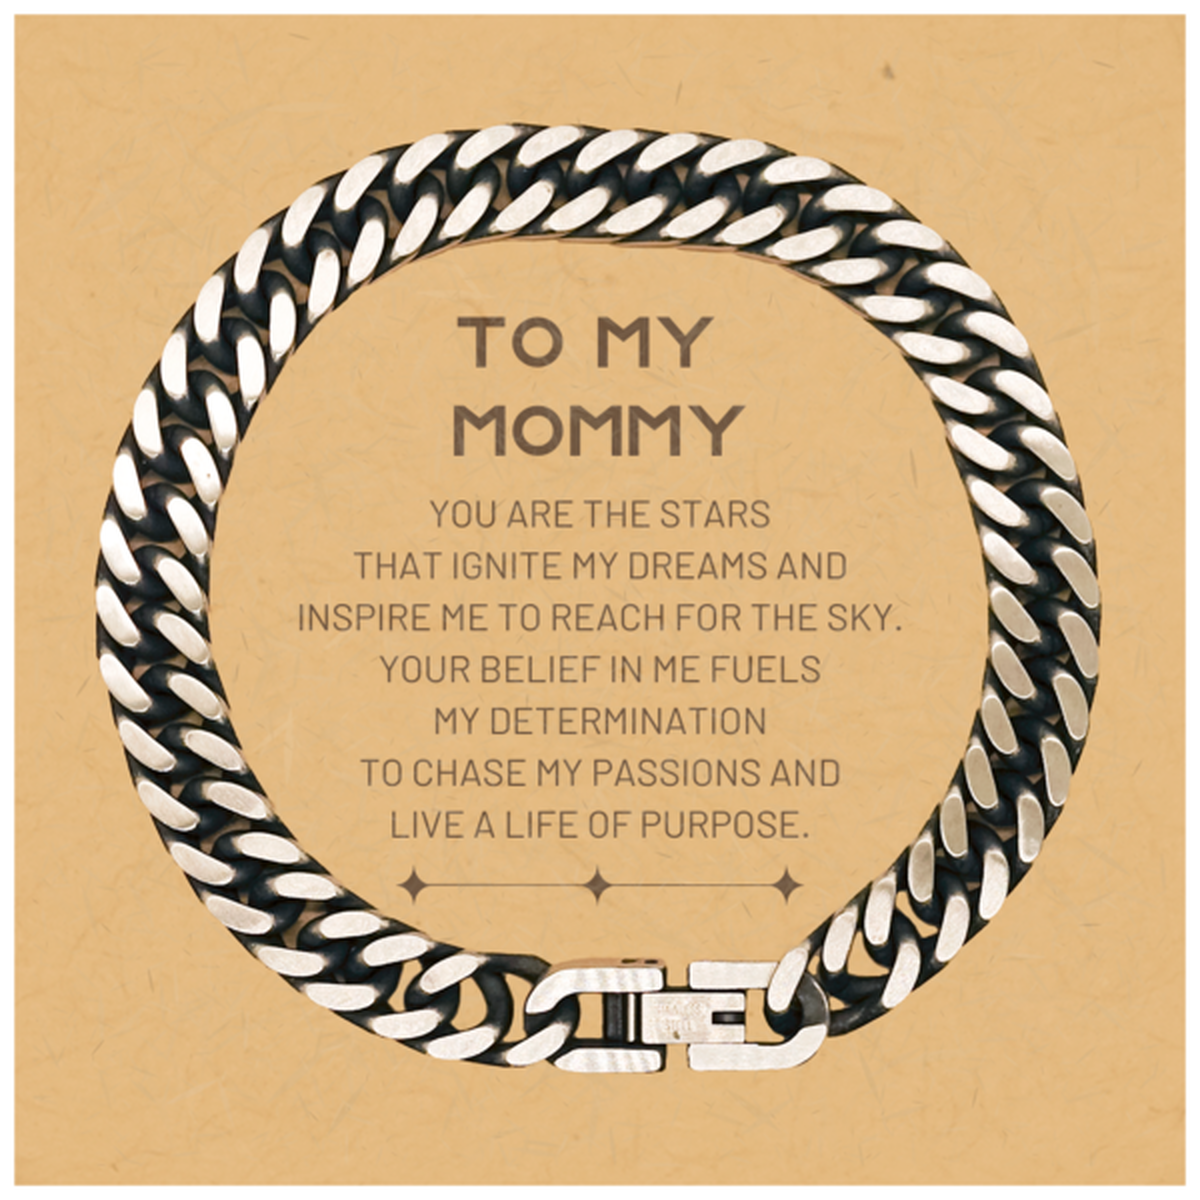 To My Mommy Cuban Link Chain Bracelet, You are the stars that ignite my dreams and inspire me to reach for the sky, Birthday Christmas Unique Gifts For Mommy, Thank You Gifts For Mommy